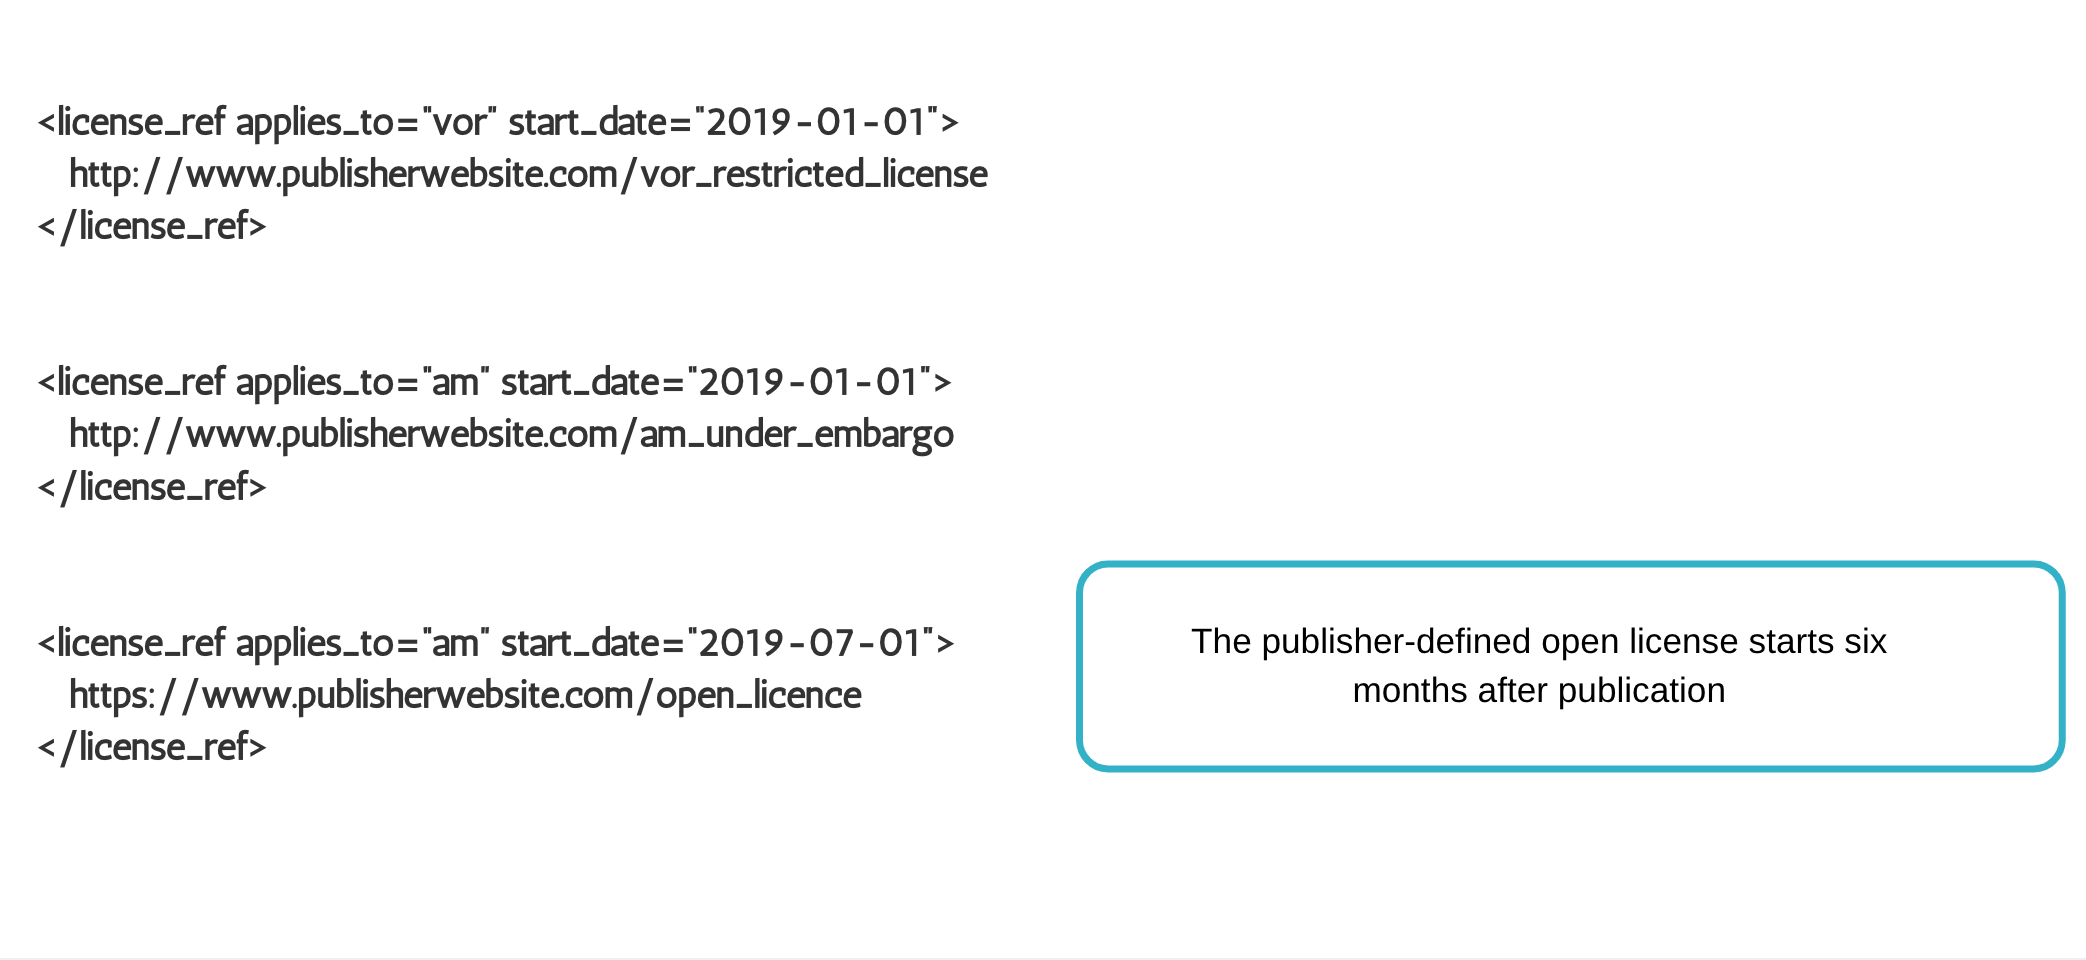 Green OA with member-defined post-embargo license